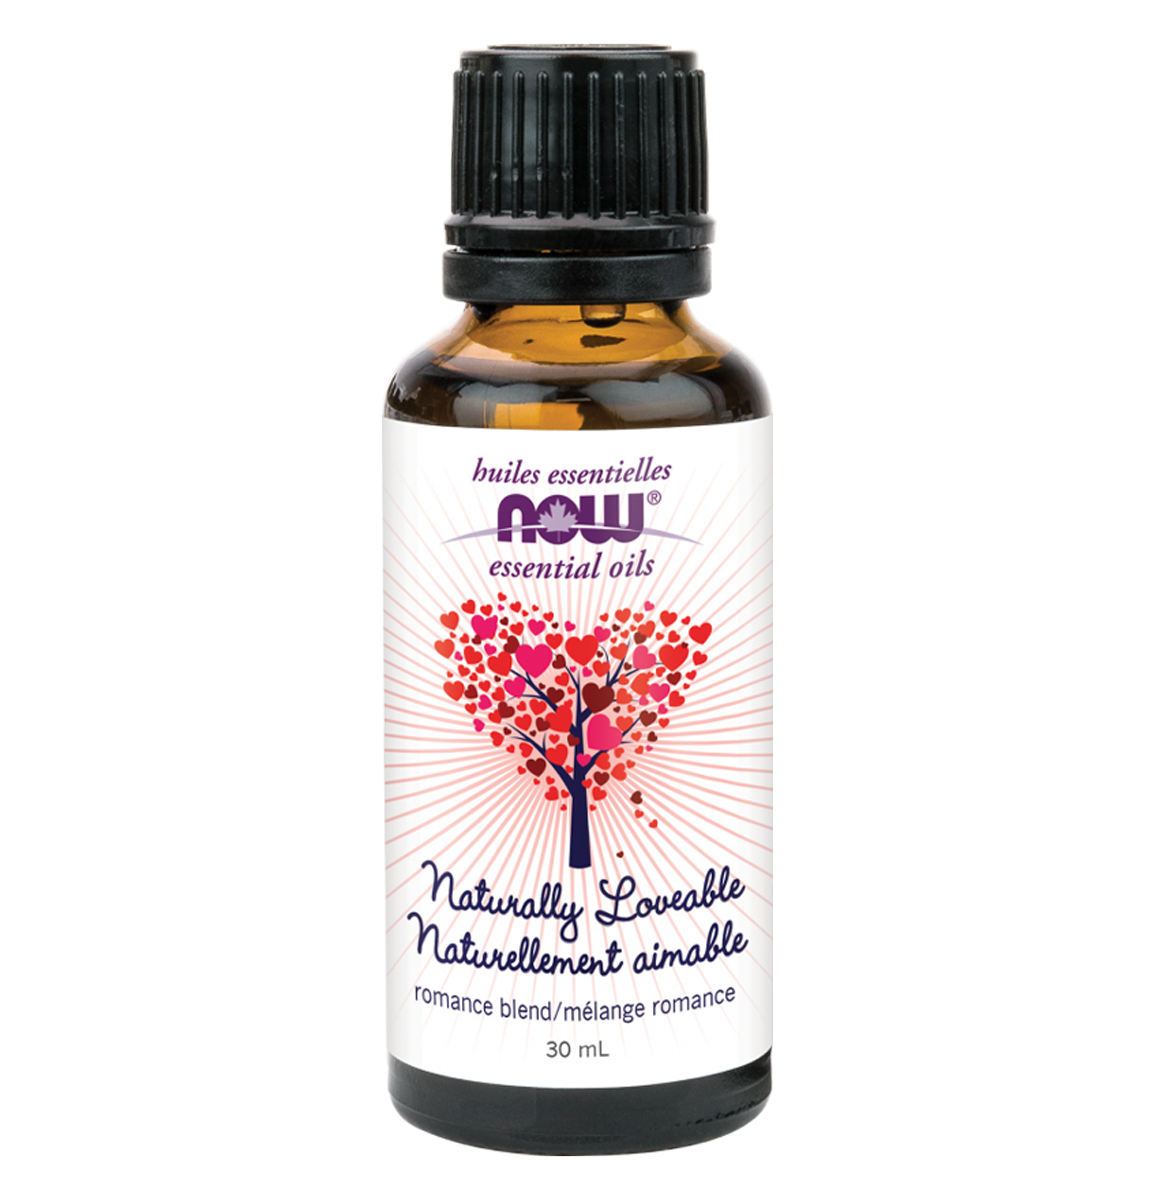 NOW Naturally Loveable Essential Oil Blend 30ml